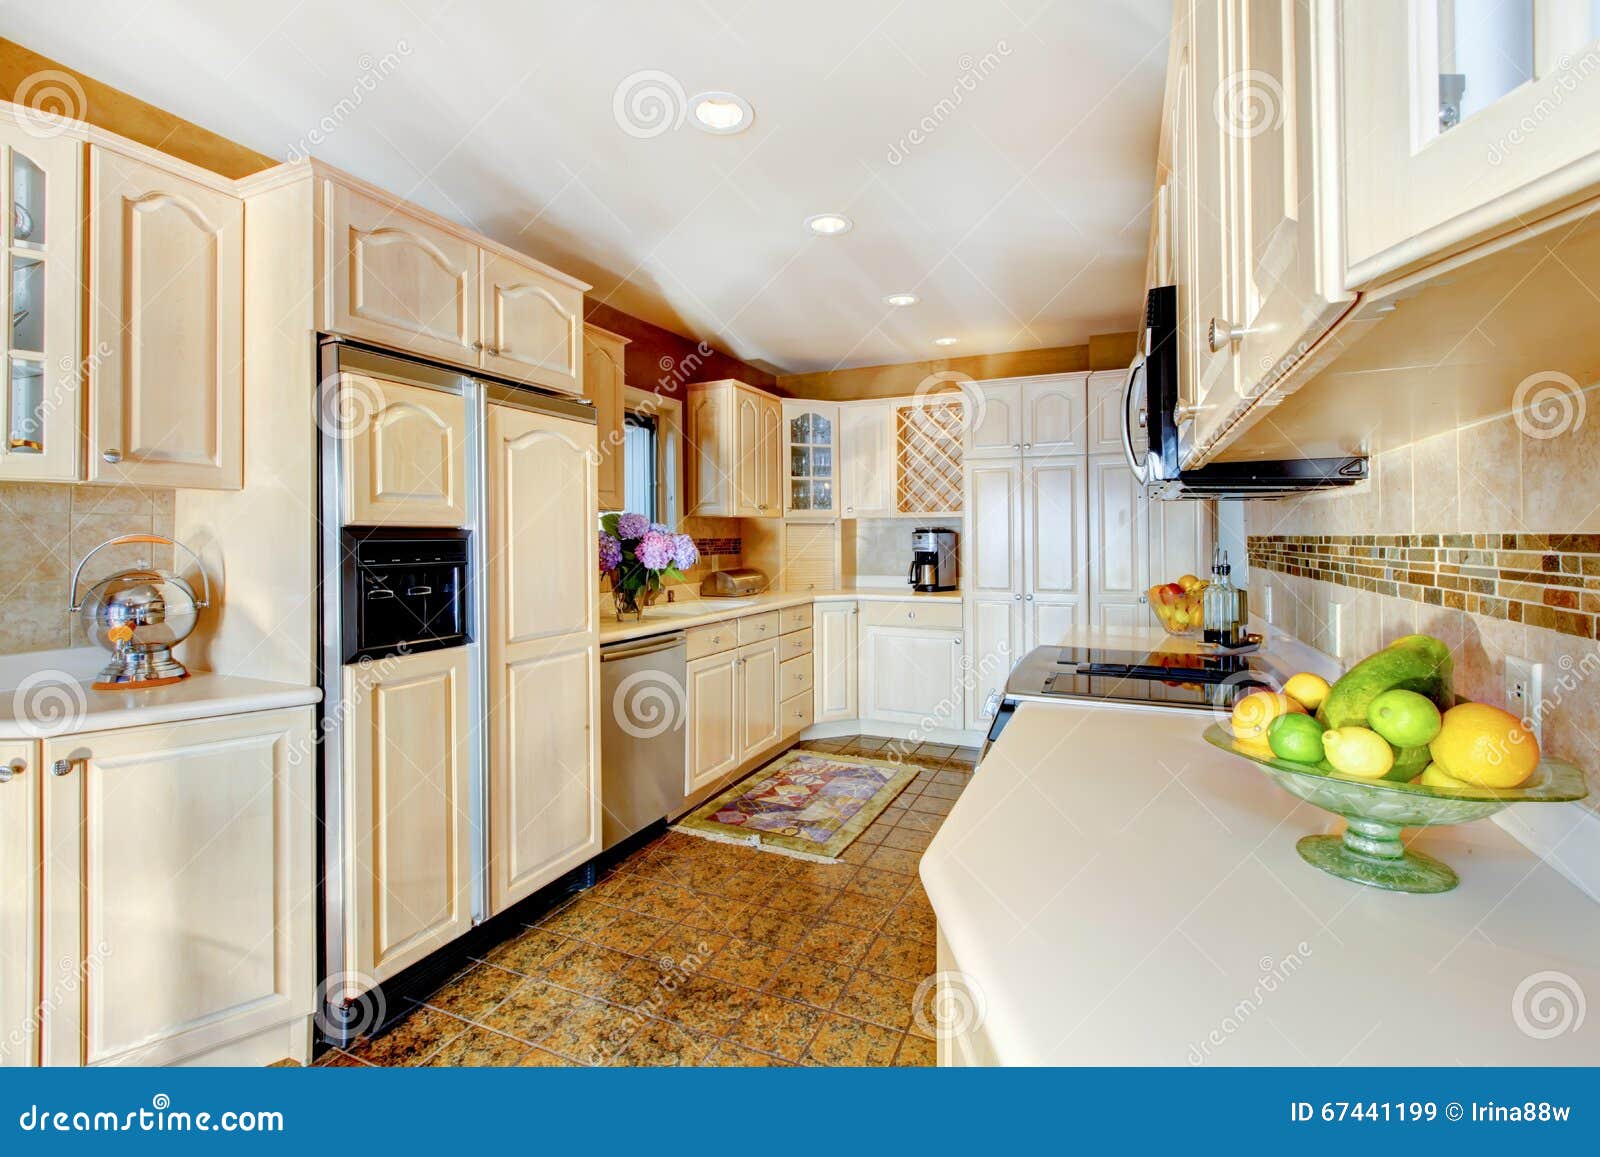 Luxury Kitchen With Cream Cabinets And White Counter Tops Stock